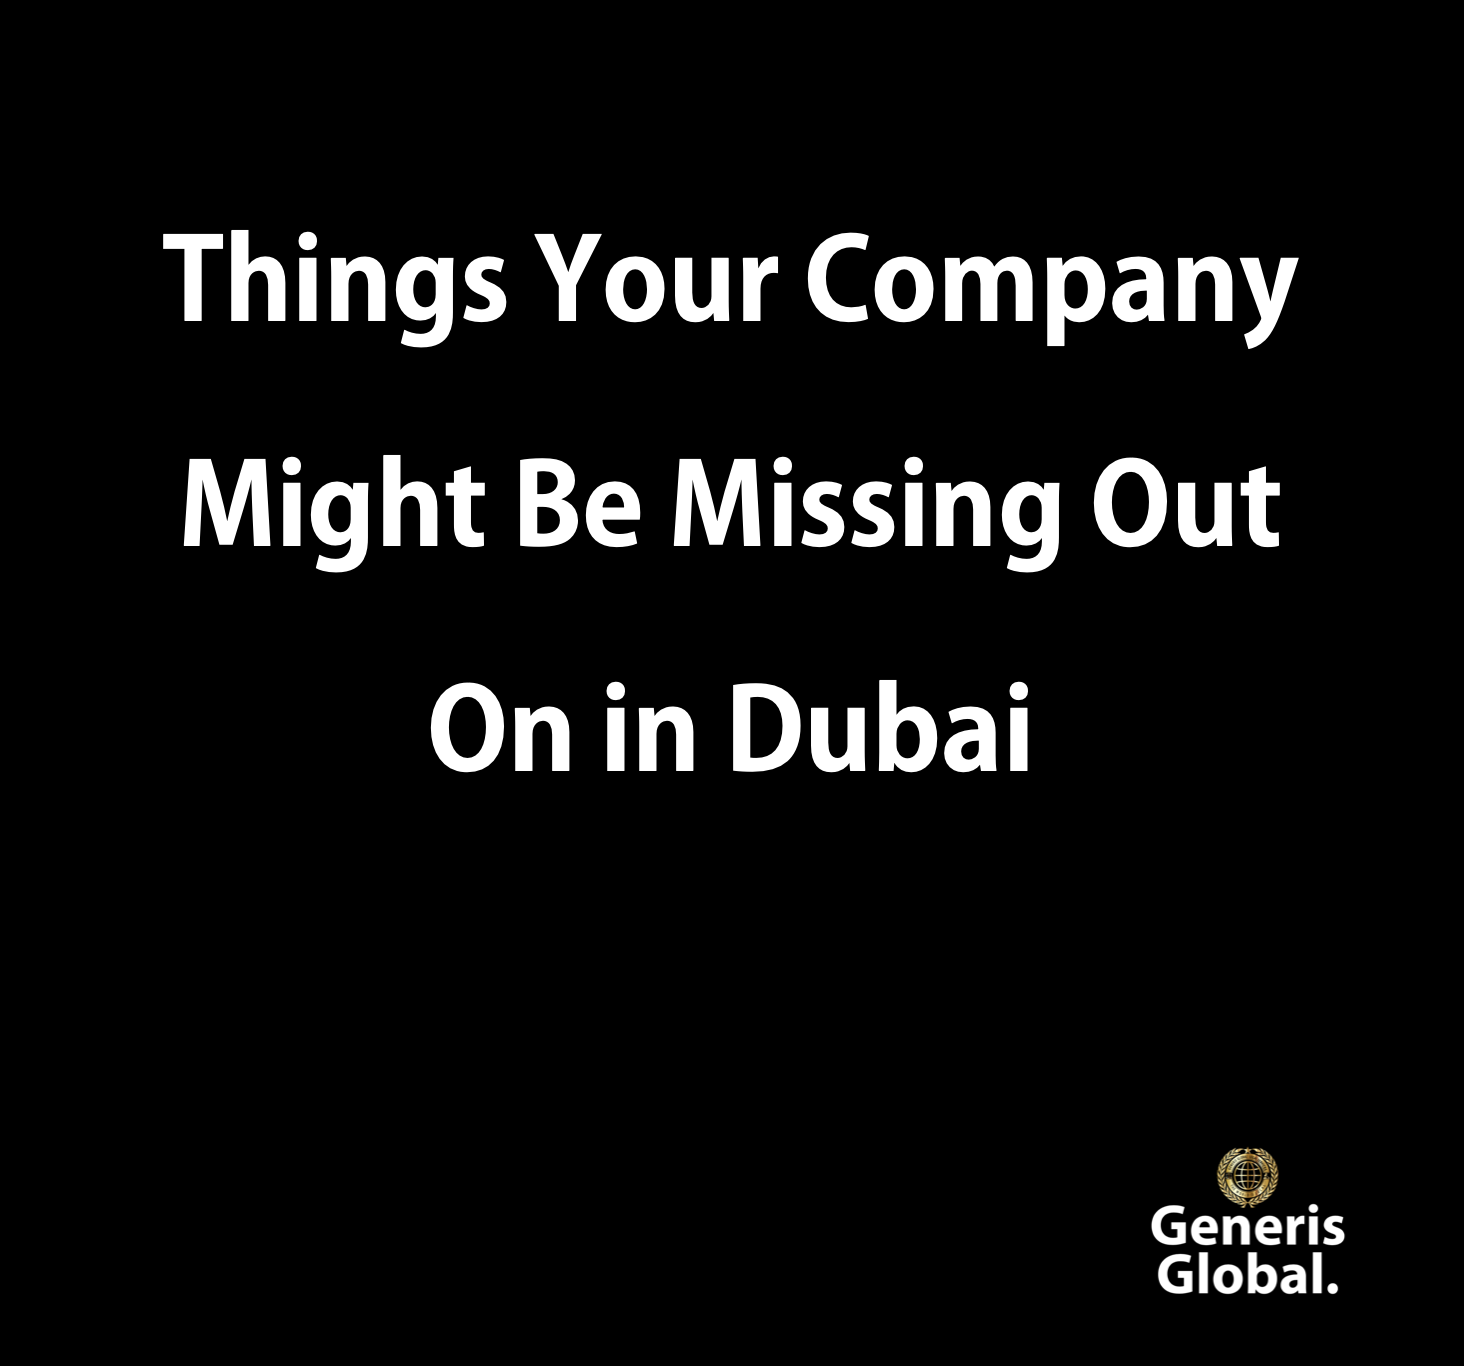 Things Your Company Might Be Missing Out On in Dubai